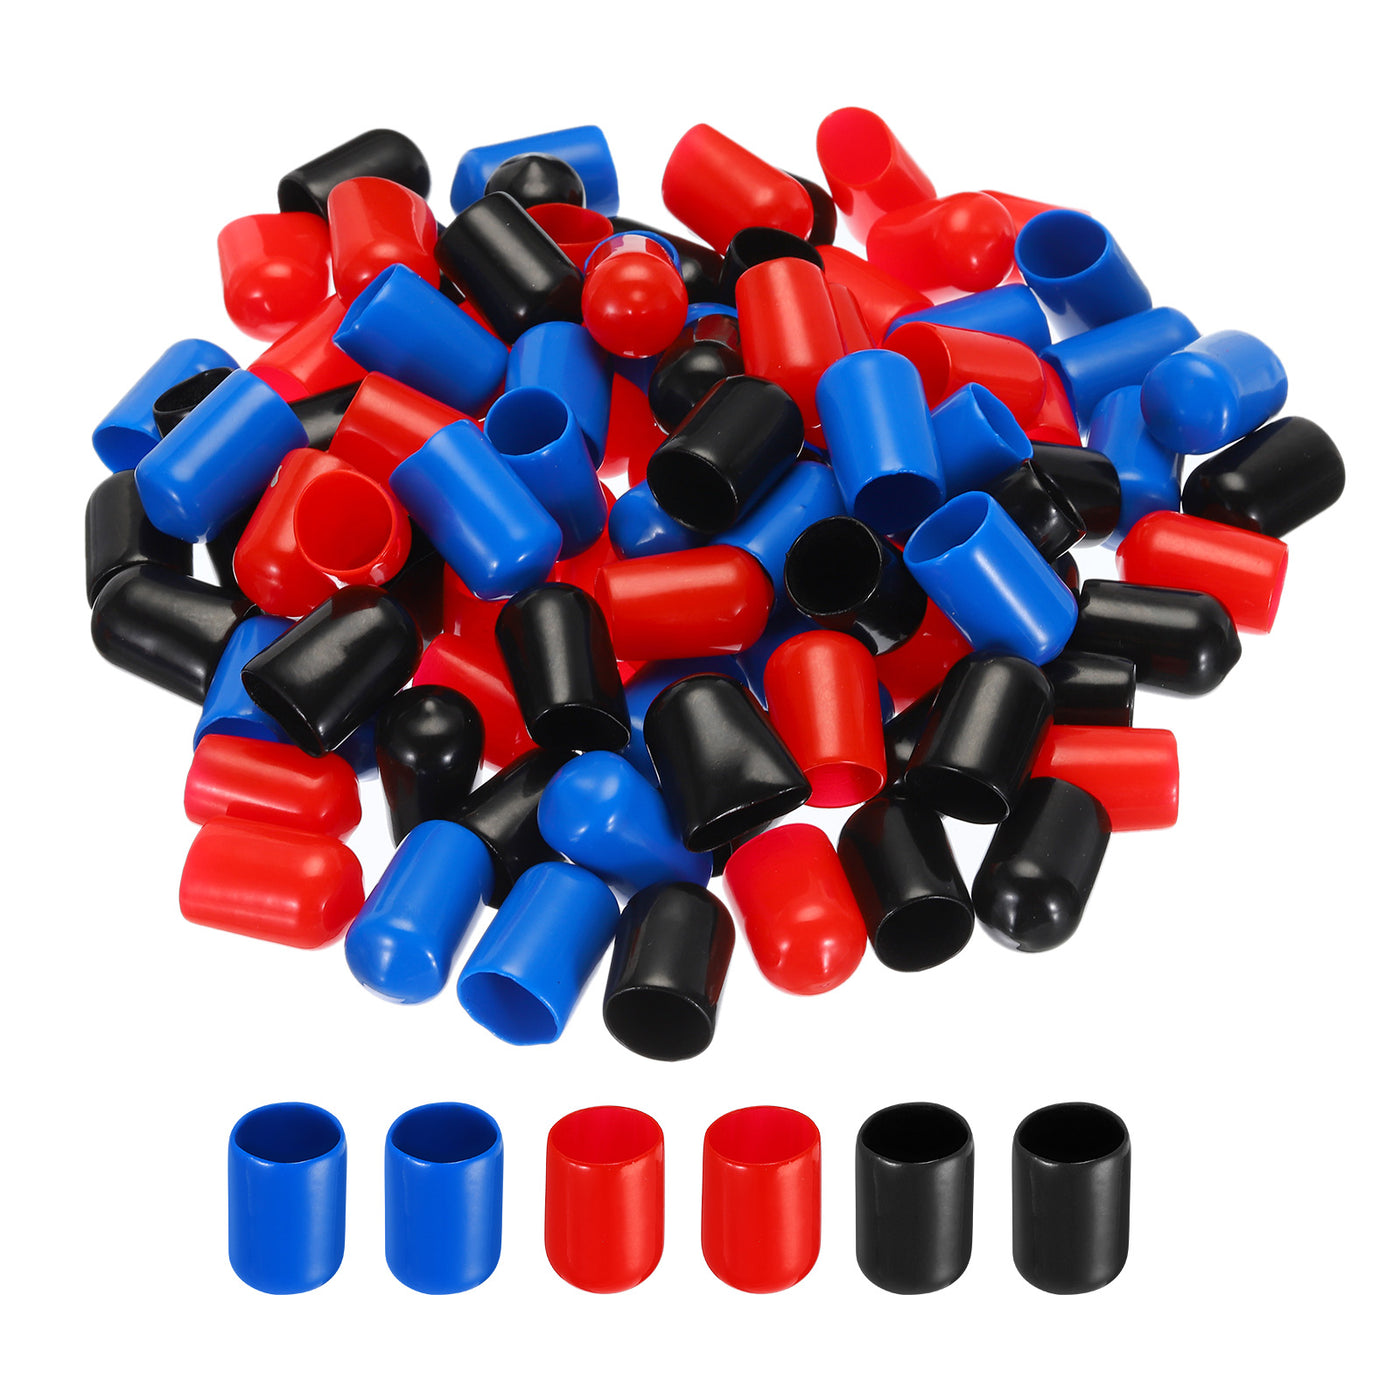 uxcell Uxcell 90pcs Rubber End Caps 13mm(1/2") ID Vinyl PVC Round Tube Bolt Cap Cover Screw Thread Protectors, Black Red Blue